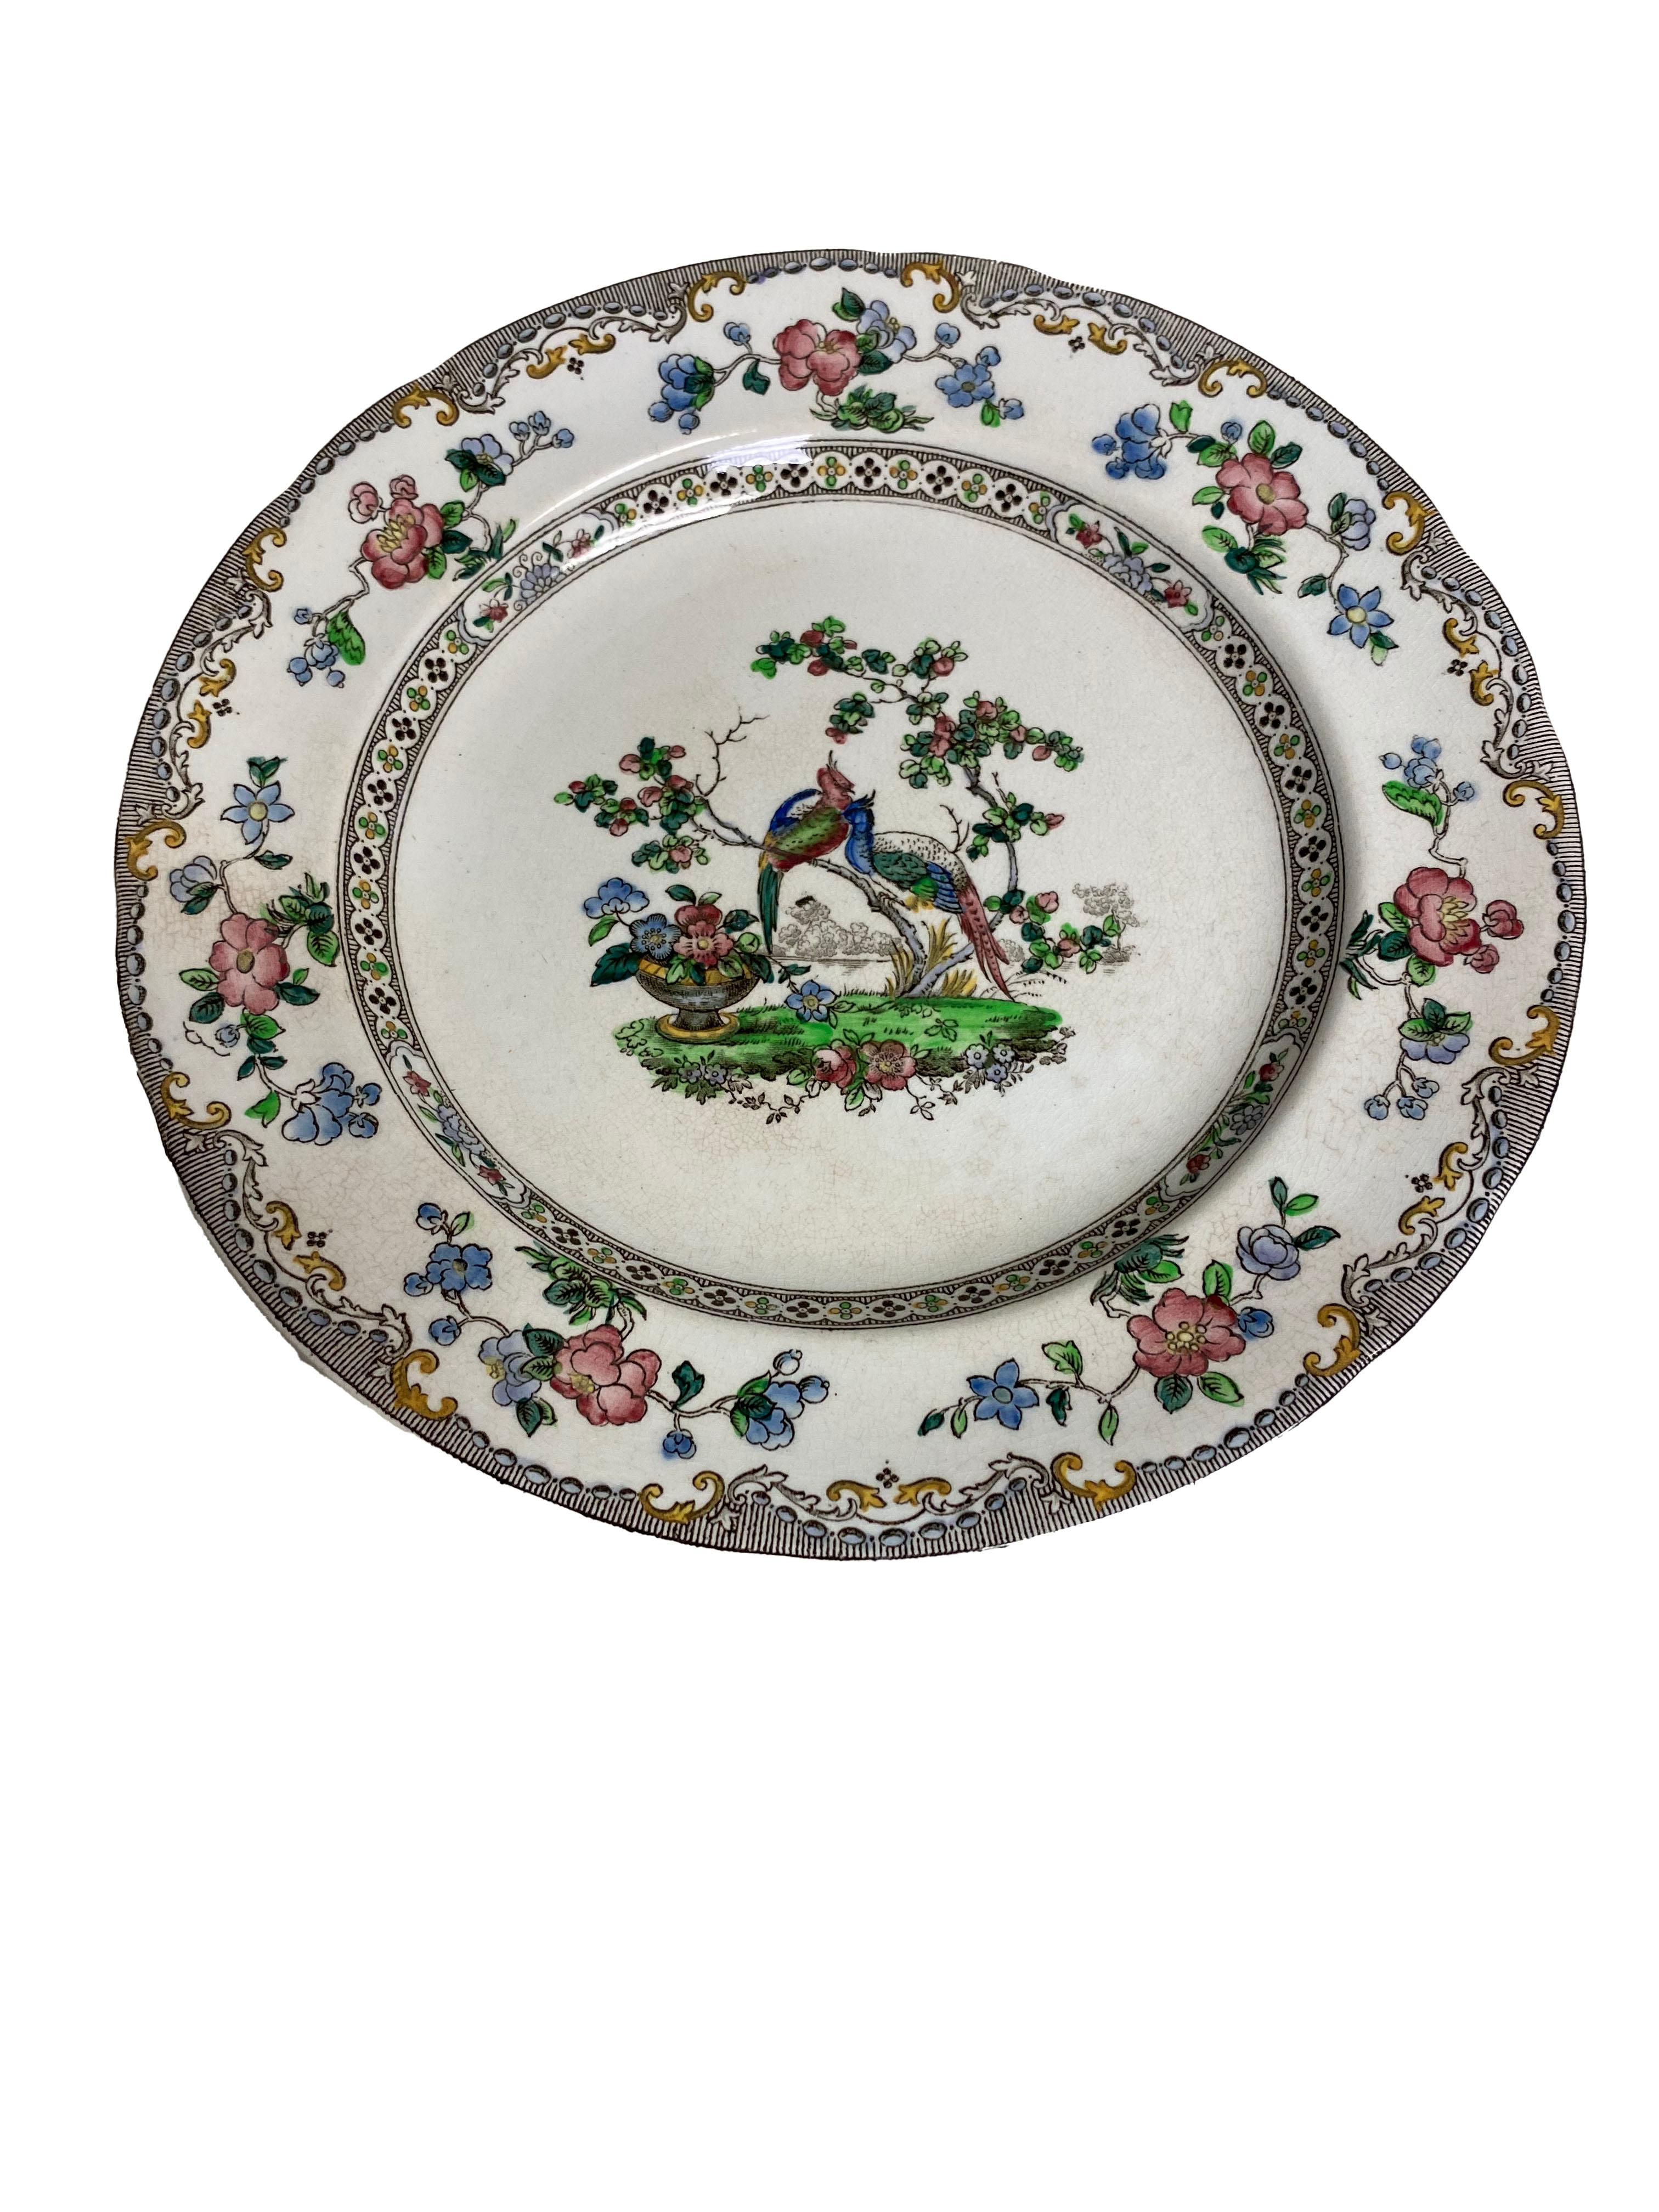 A wonderful pair of early Copeland Spode Bridal Veil chinoiserie plates featuring two pheasants on a branch. Each with registration number 615911. These were made exclusively for F Gorringe Ltd of Buckingham Palace Rd, London. circa 1913, England.